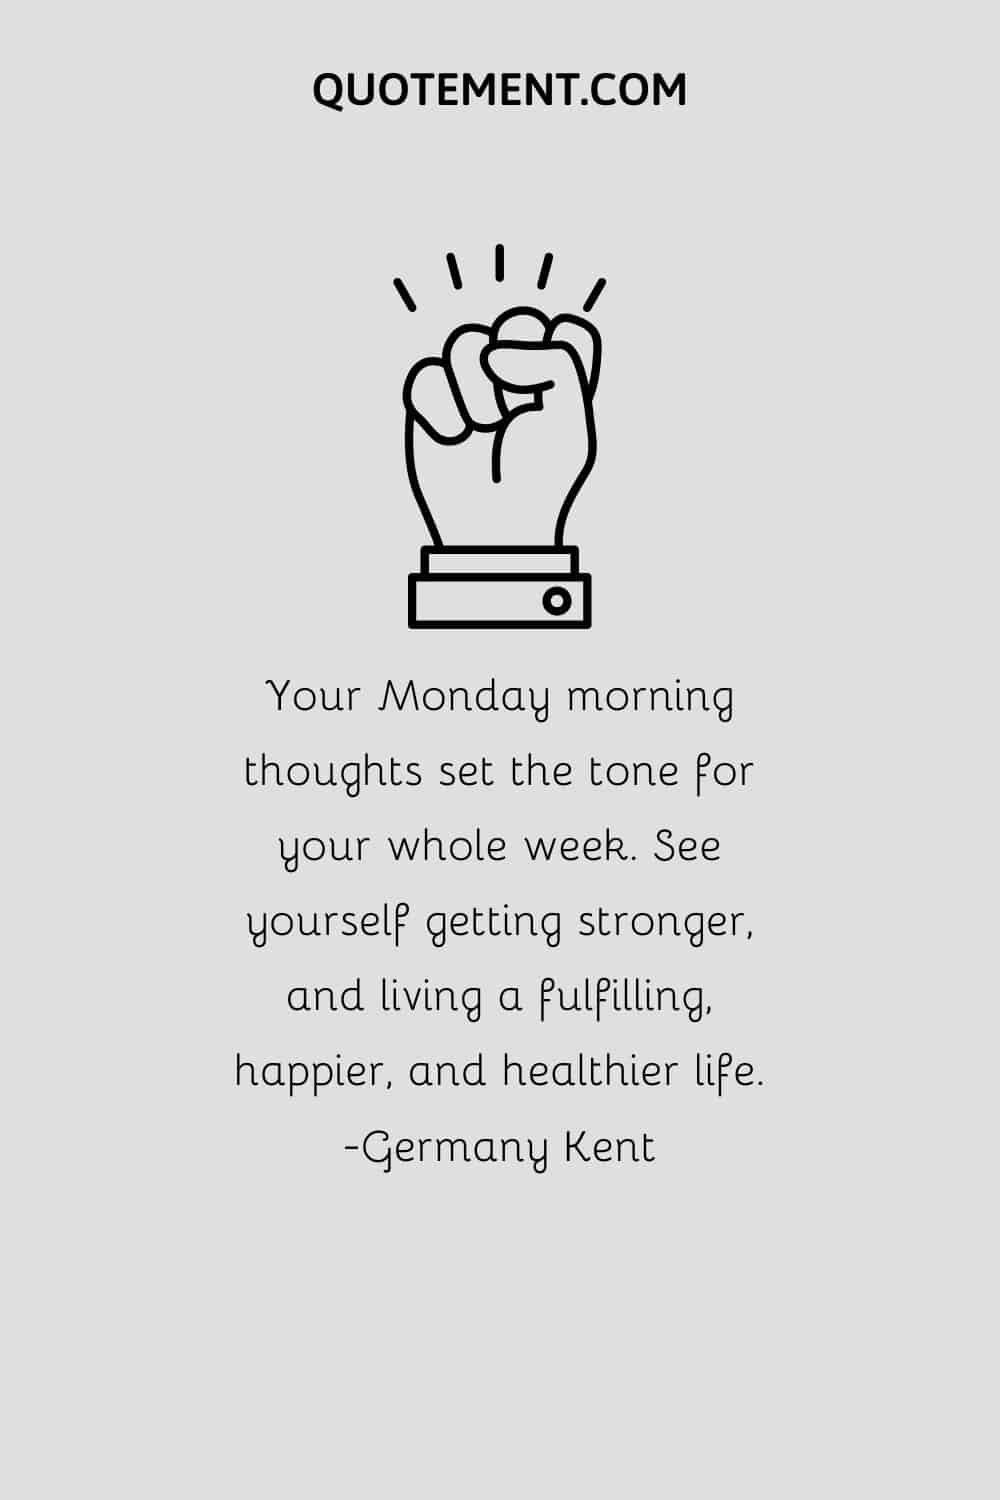 Your Monday morning thoughts set the tone for your whole week